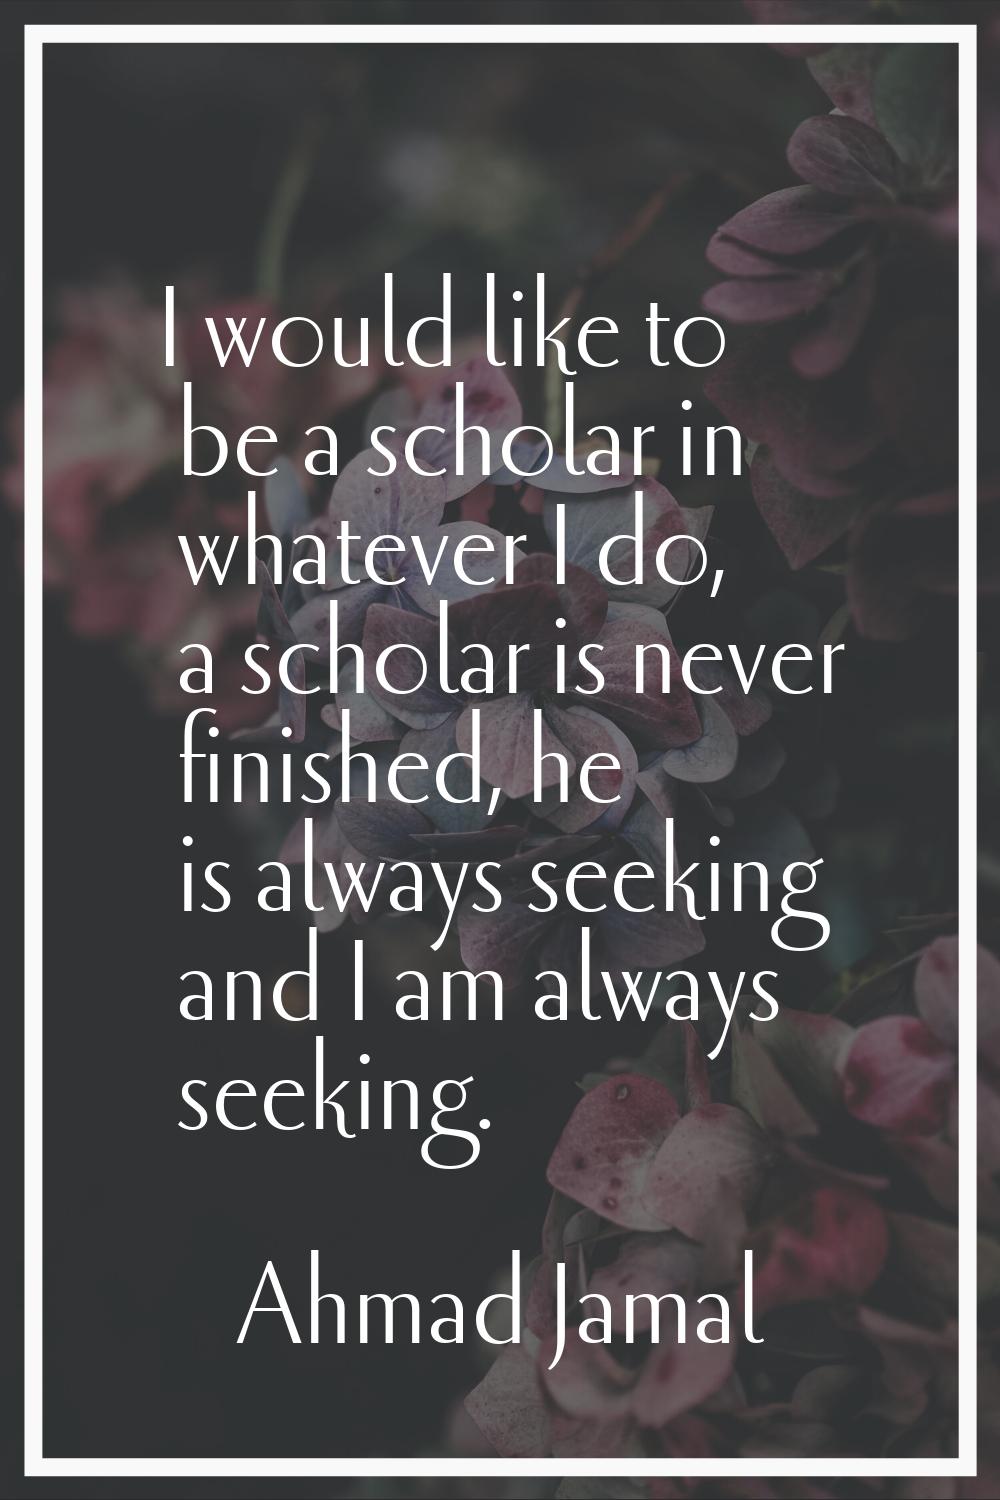 I would like to be a scholar in whatever I do, a scholar is never finished, he is always seeking an